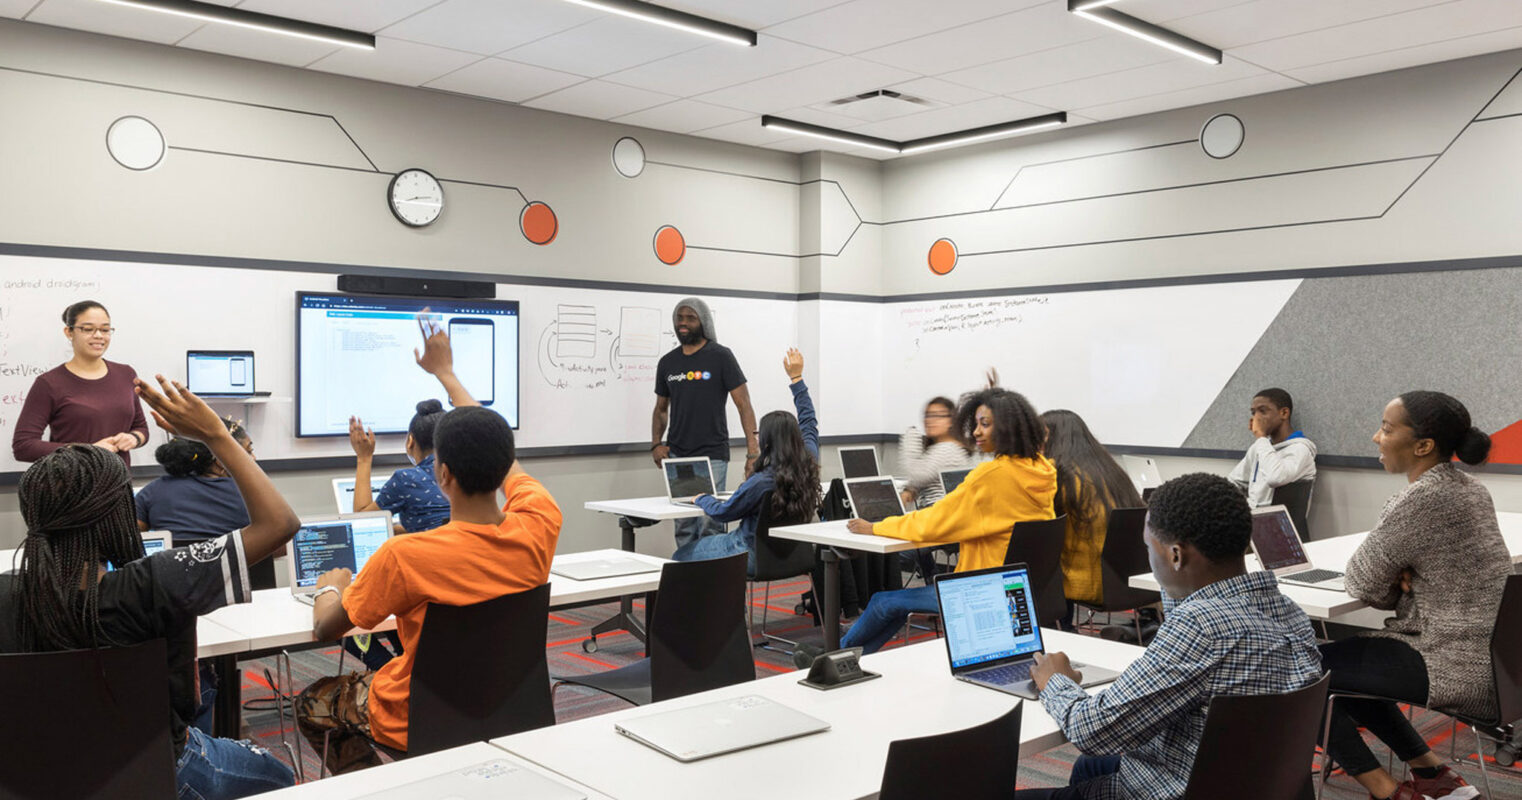 Modern classroom with vibrant orange and gray color scheme, featuring collaborative workstations, interactive whiteboard, and ceiling-mounted projector. Diverse group of students engaging in a dynamic learning session led by an instructor.